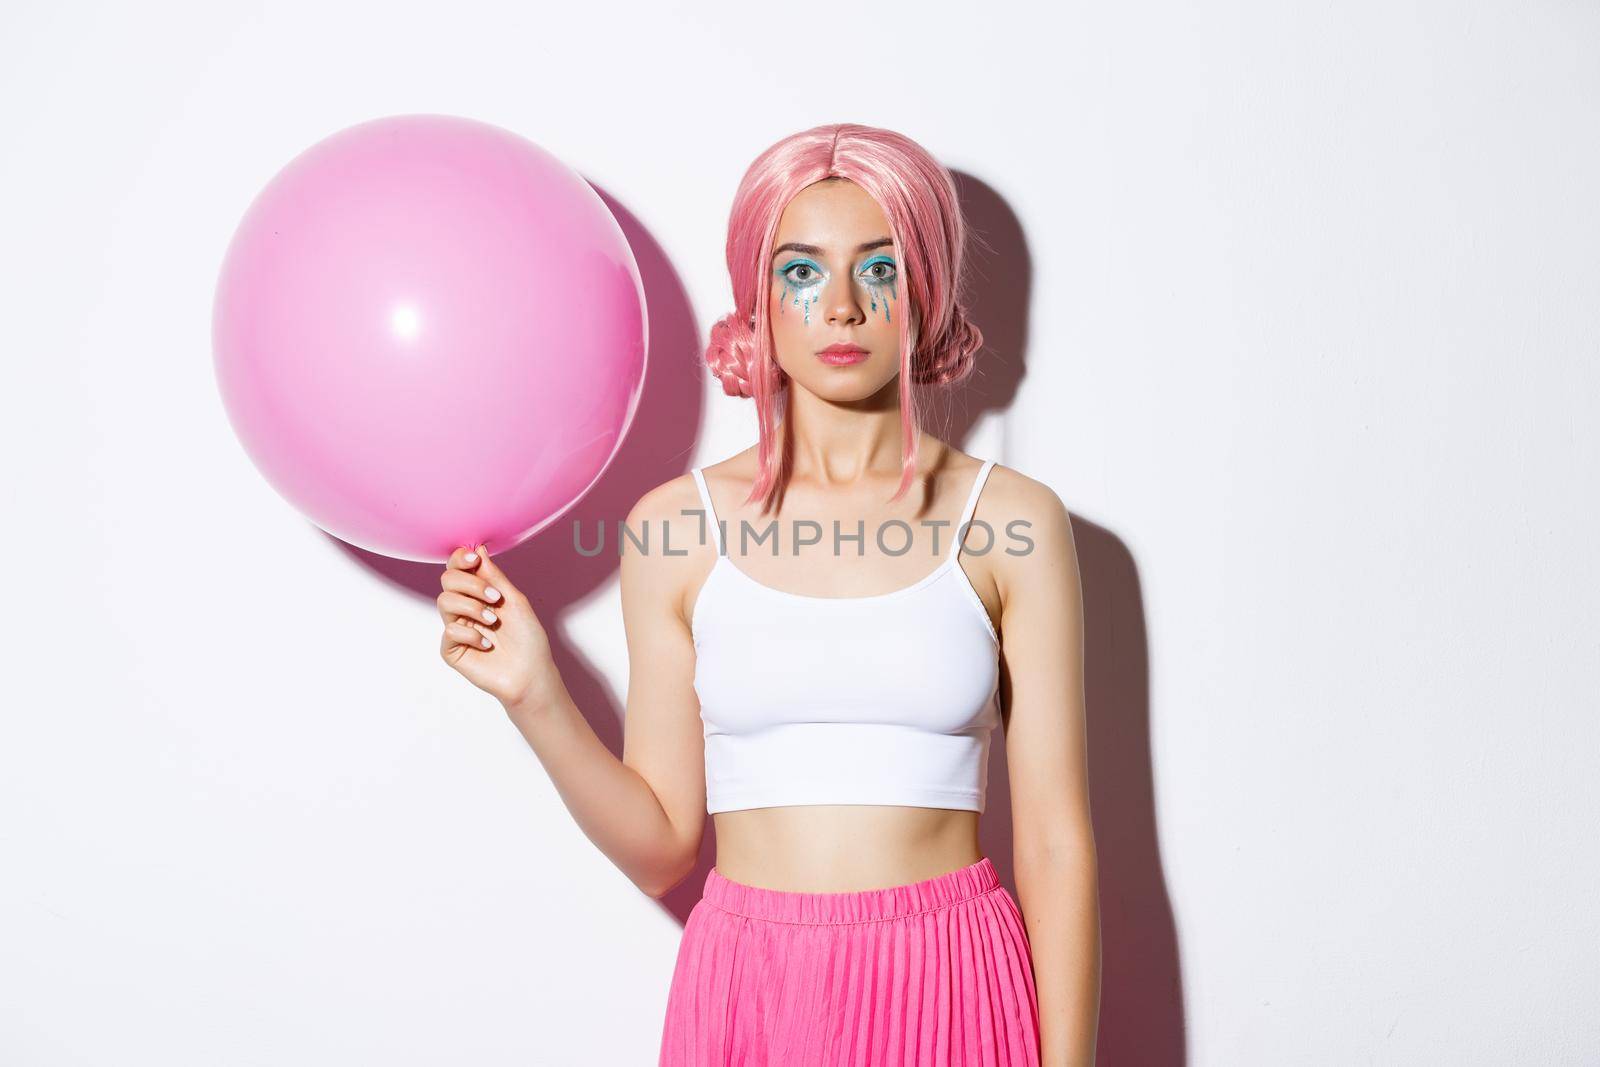 Image of young stylish girl holding pink balloon, wearing party wig and celebrating holiday, standing over white background.